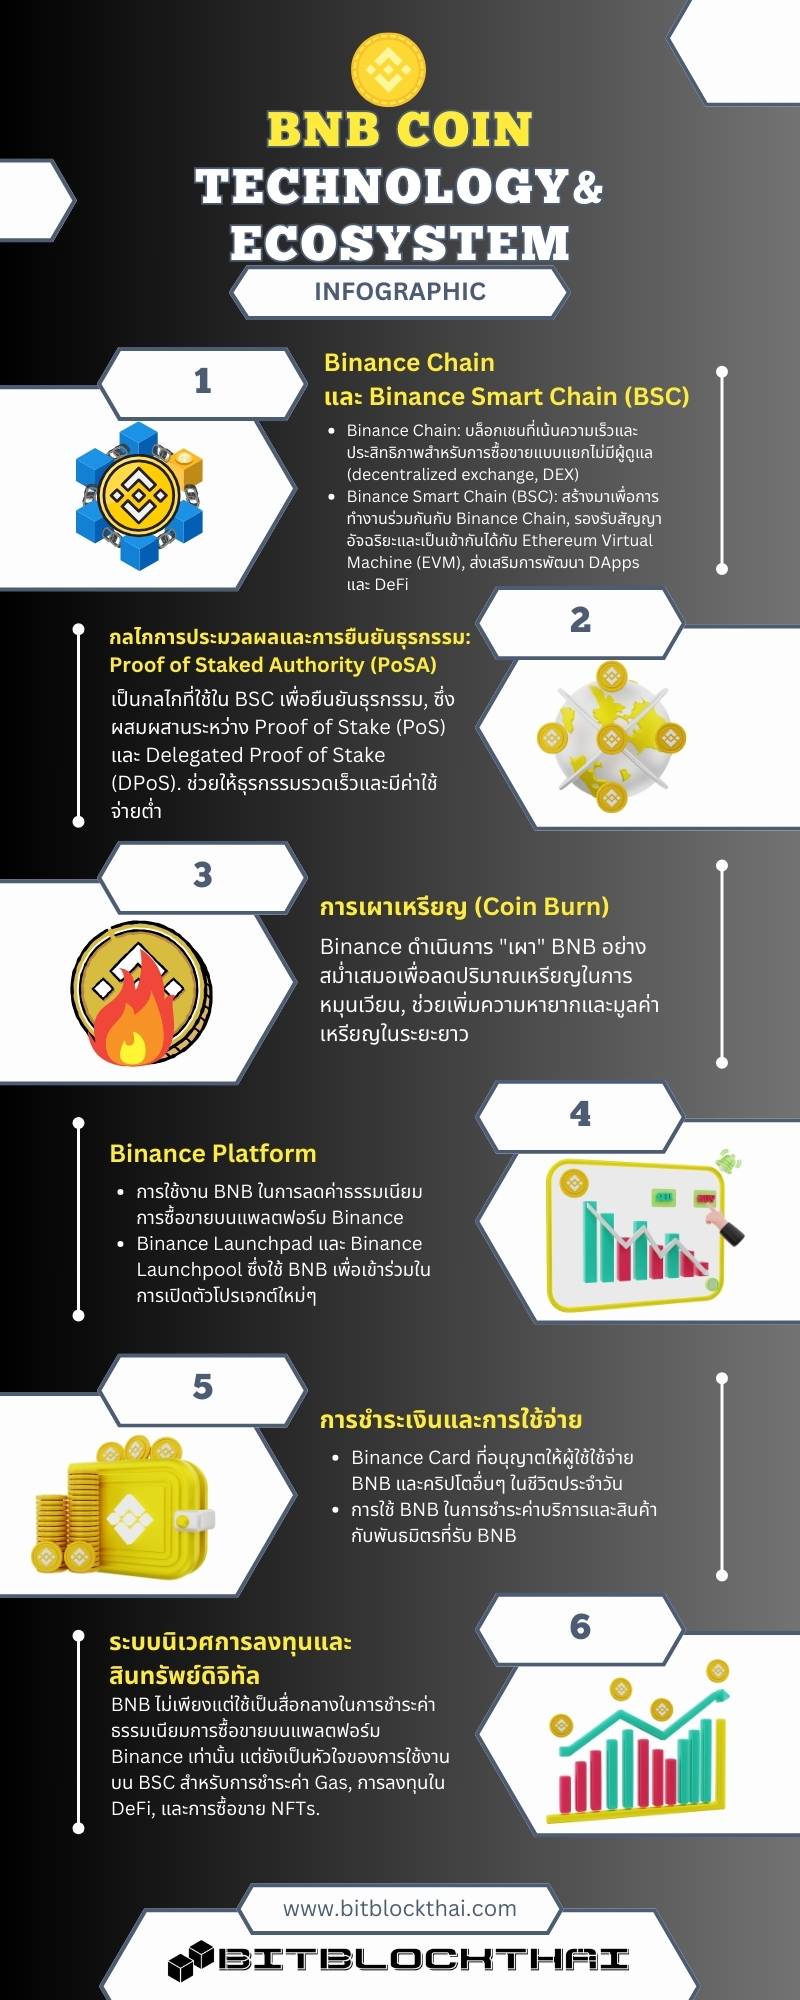 bnb coin technology and ecosystem infographic